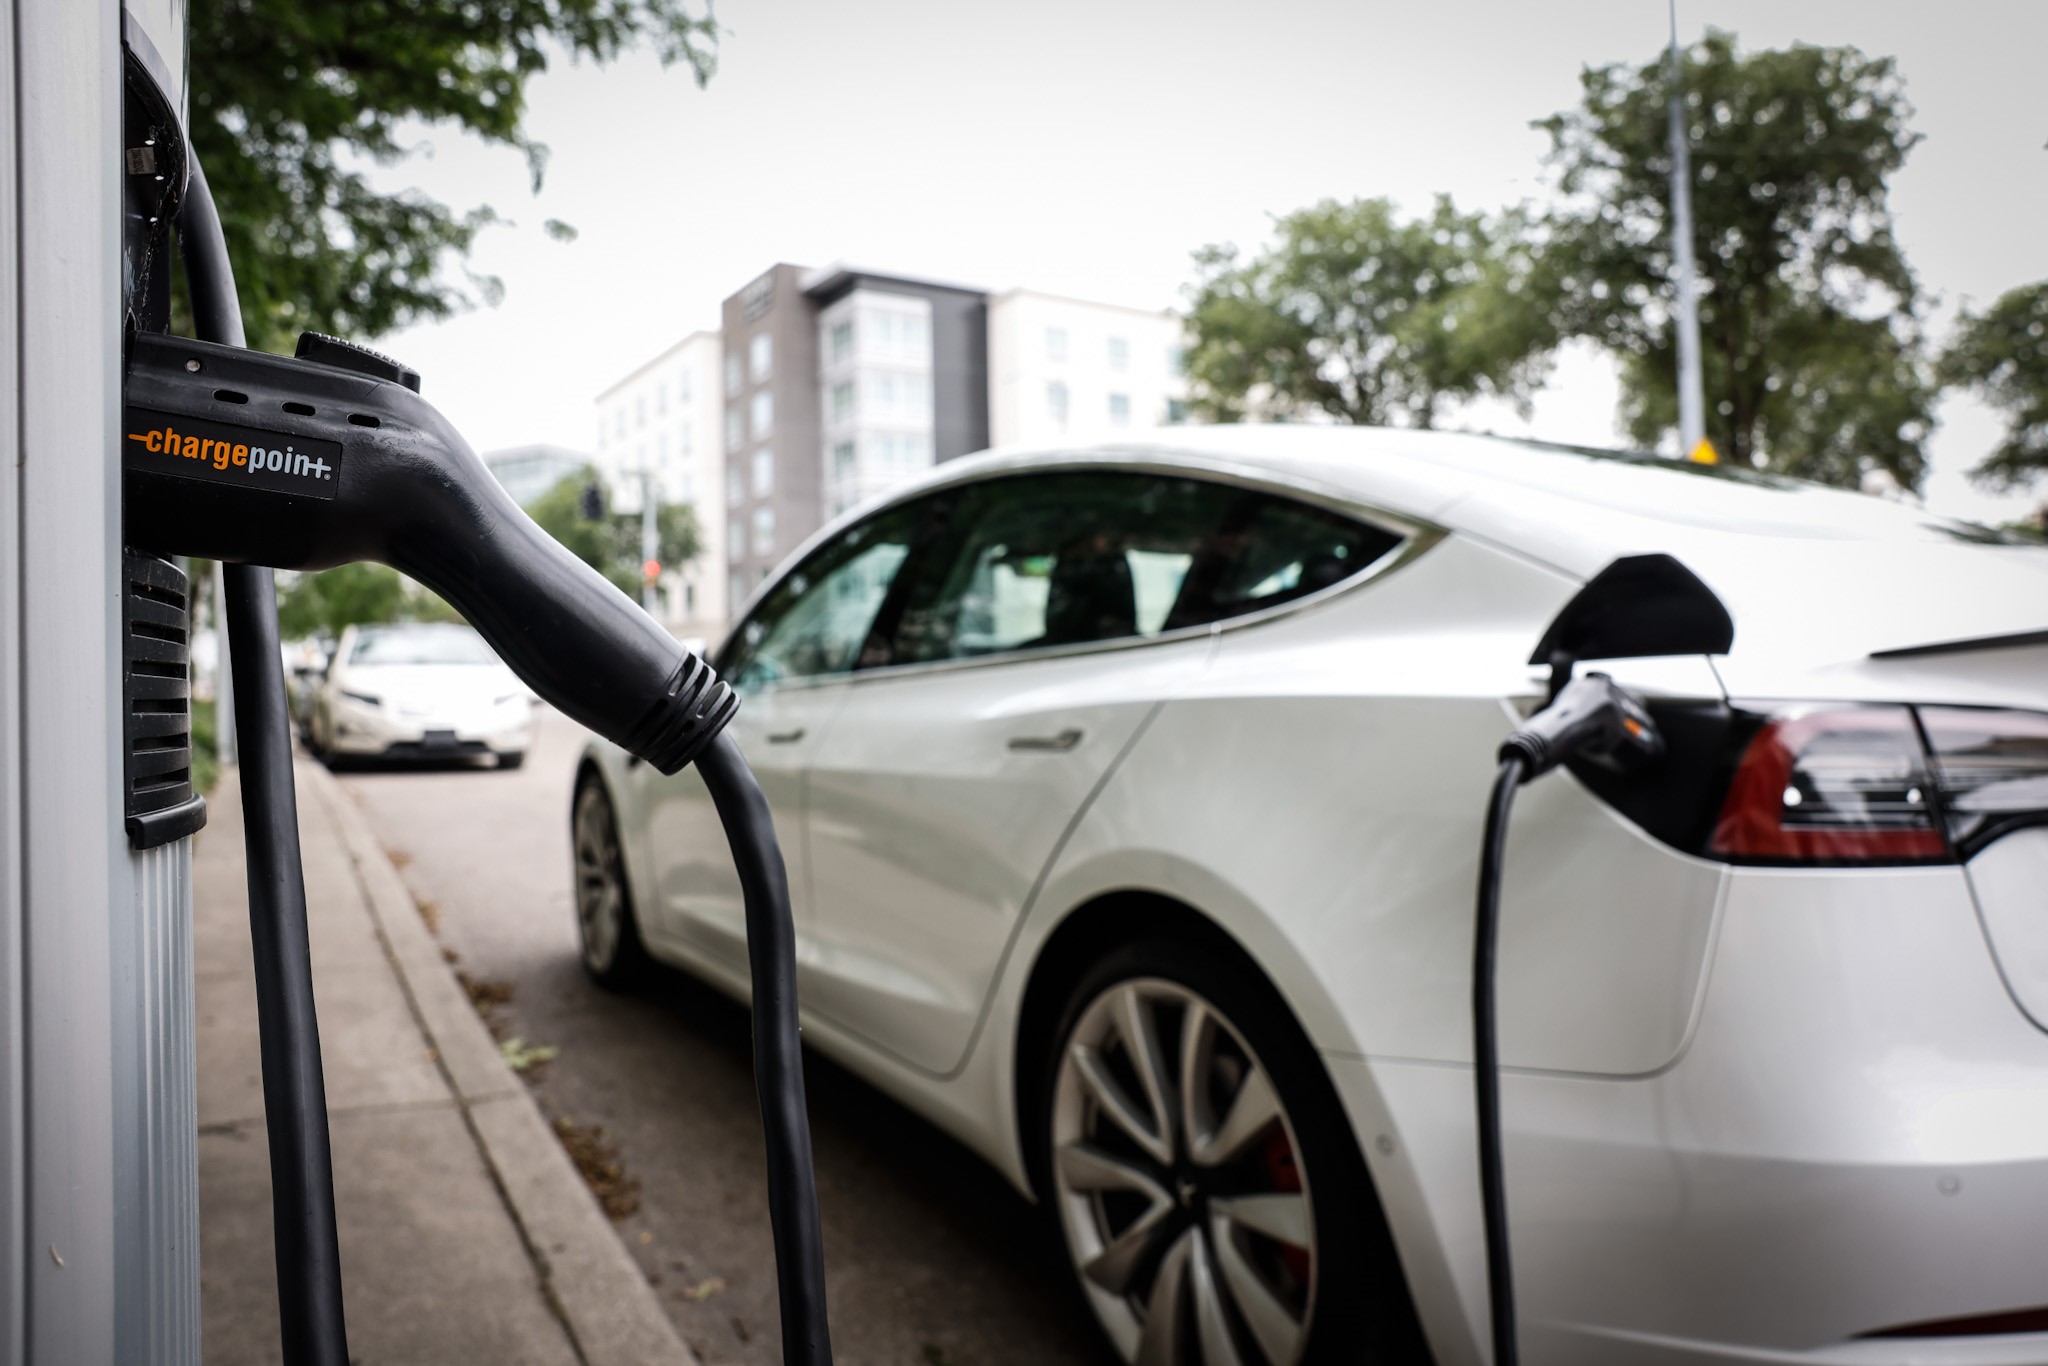 A total of $140 million is coming to Ohio to develop electric vehicle charging stations over five years. This EV charging station is located at the intersection of Monument Ave. and Patterson Blvd. JIM NOELKER/STAFF